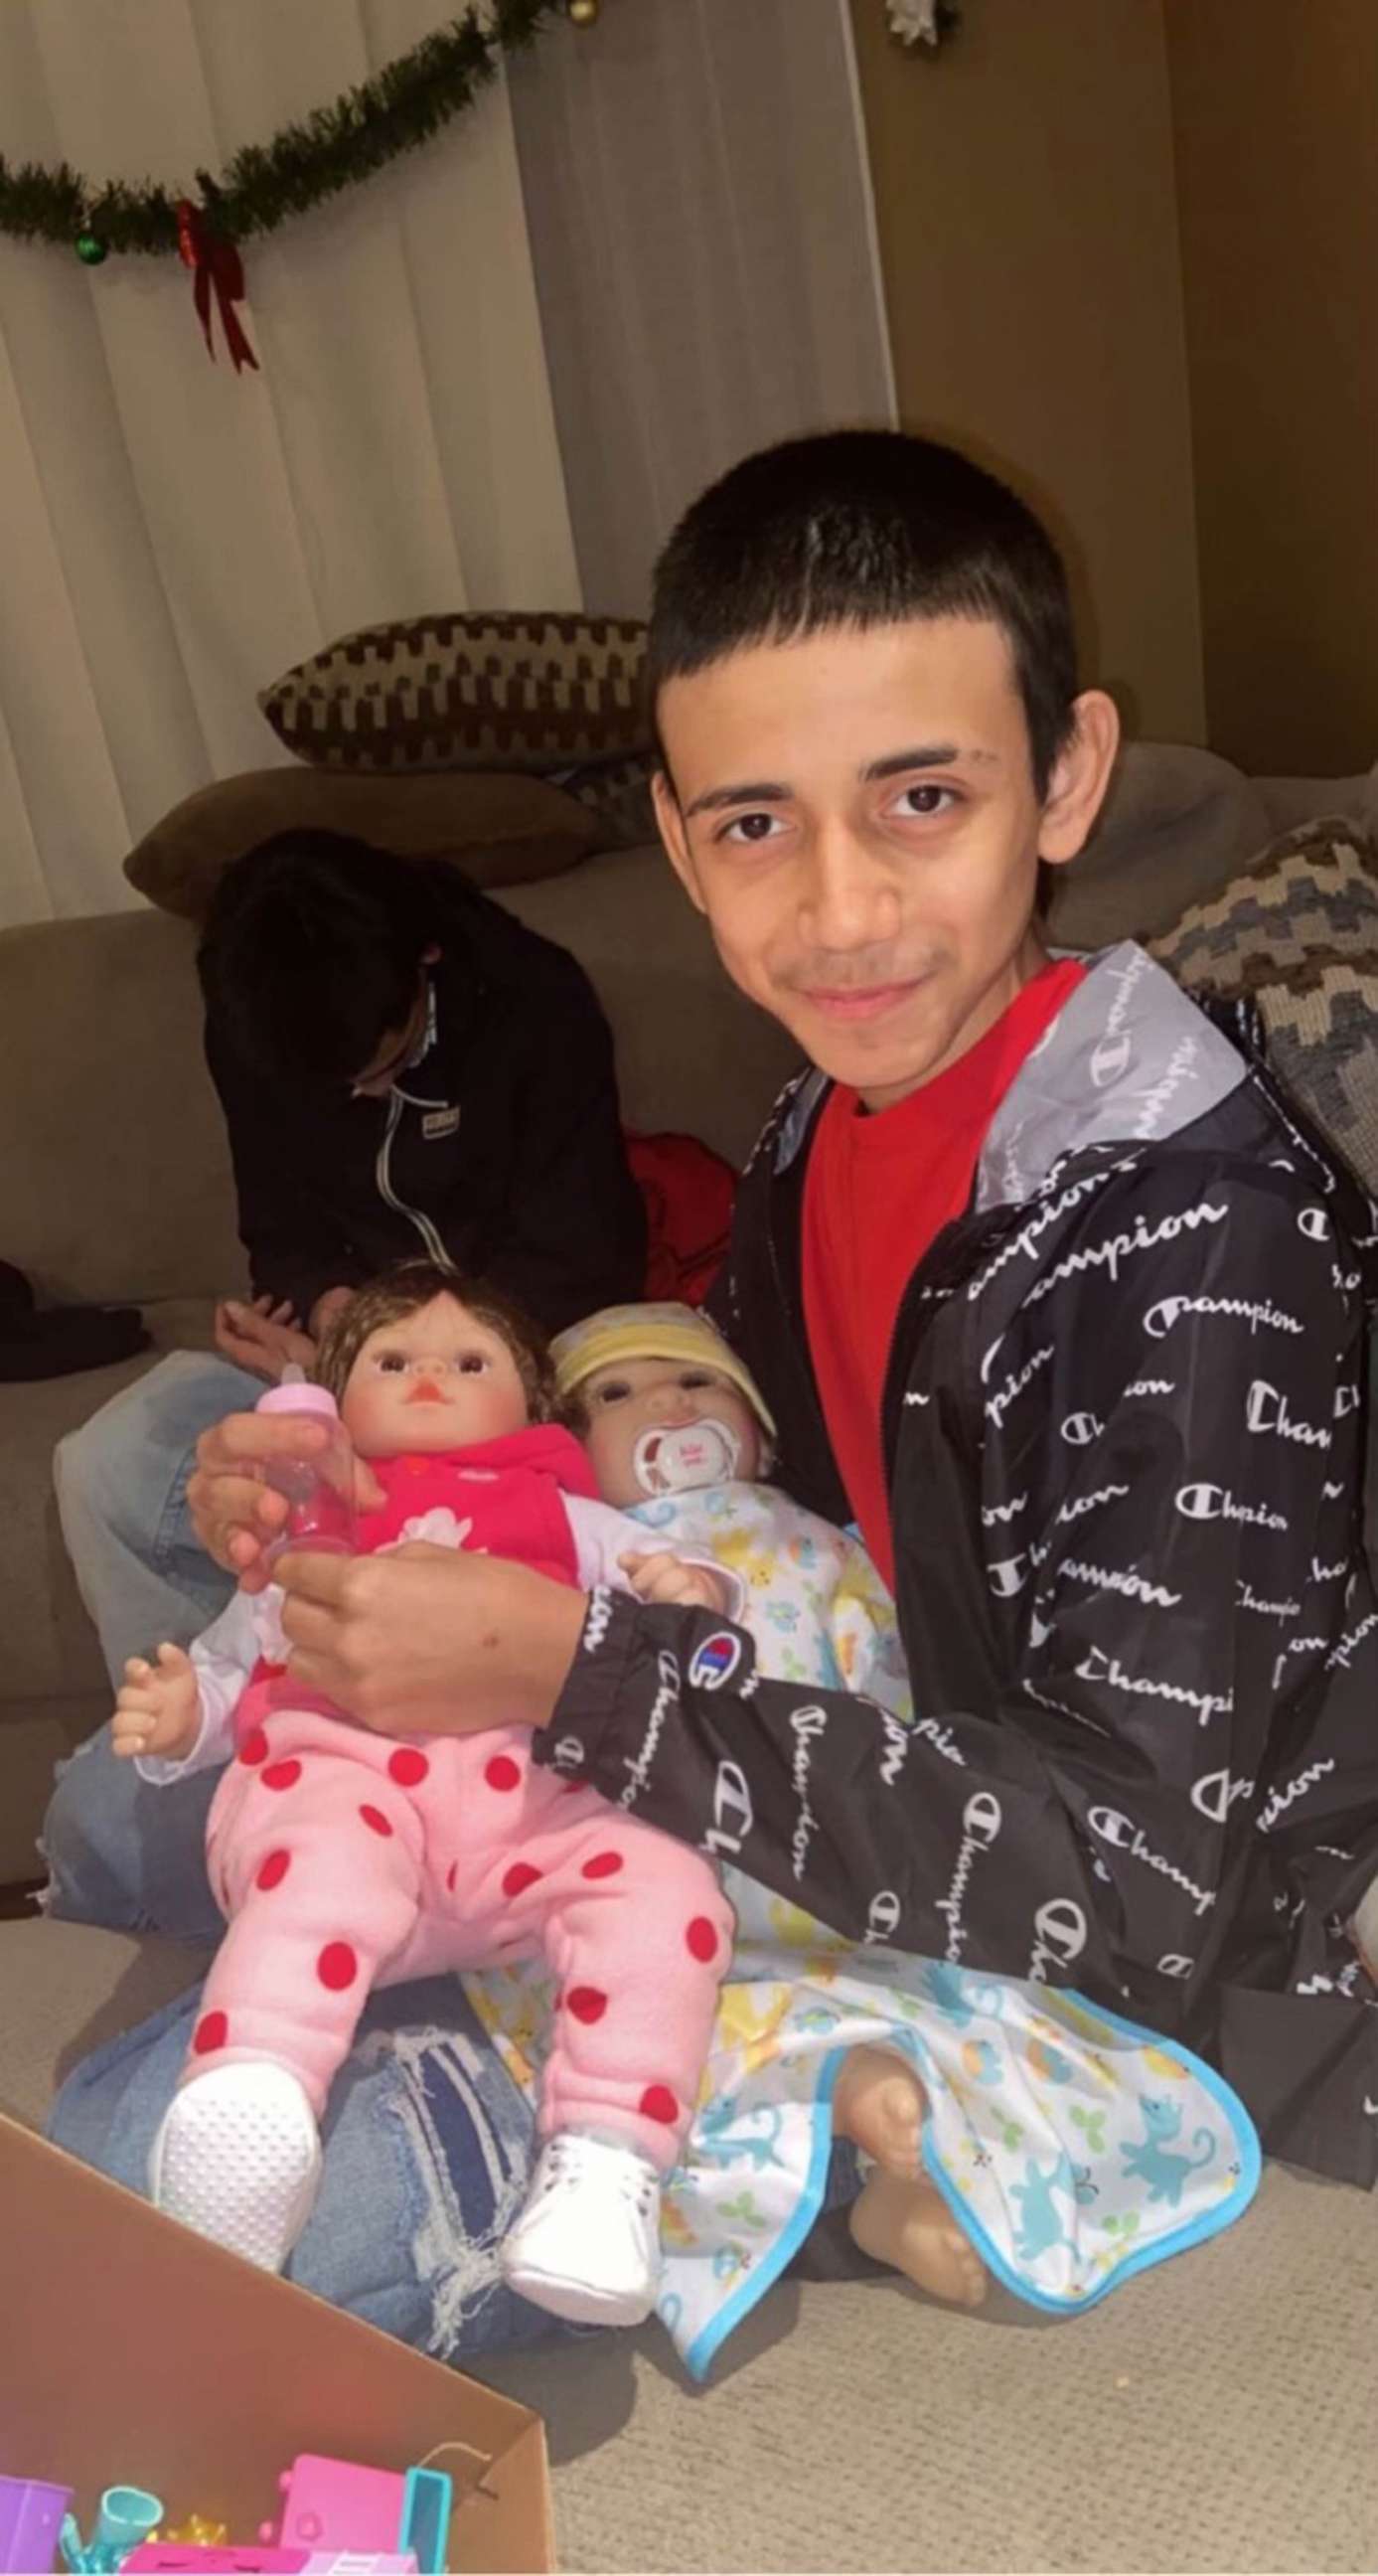 PHOTO: Adam Toledo is pictured with his cousin's 7-year-old daughter Kaylah's dolls, Jan. 1, 2021. Adam would play with them to make Kaylah laugh, his cousin told ABC News.